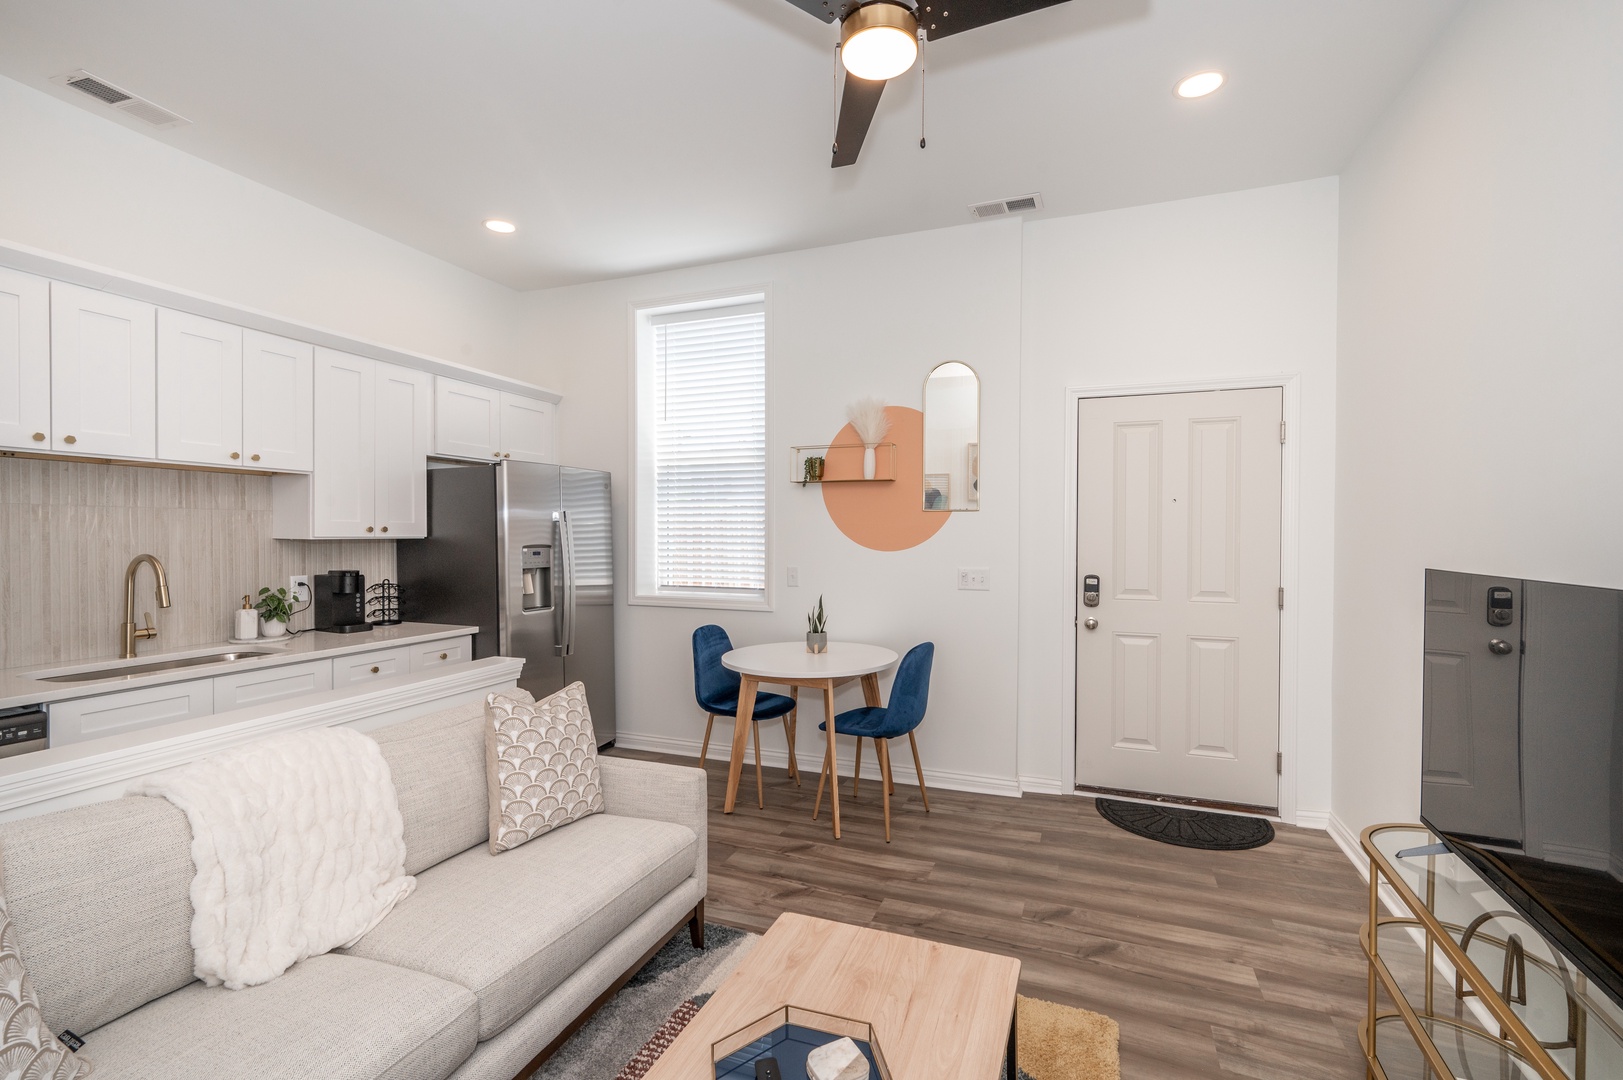 Unit 202: The bright, open main area offers a perfect place to relax